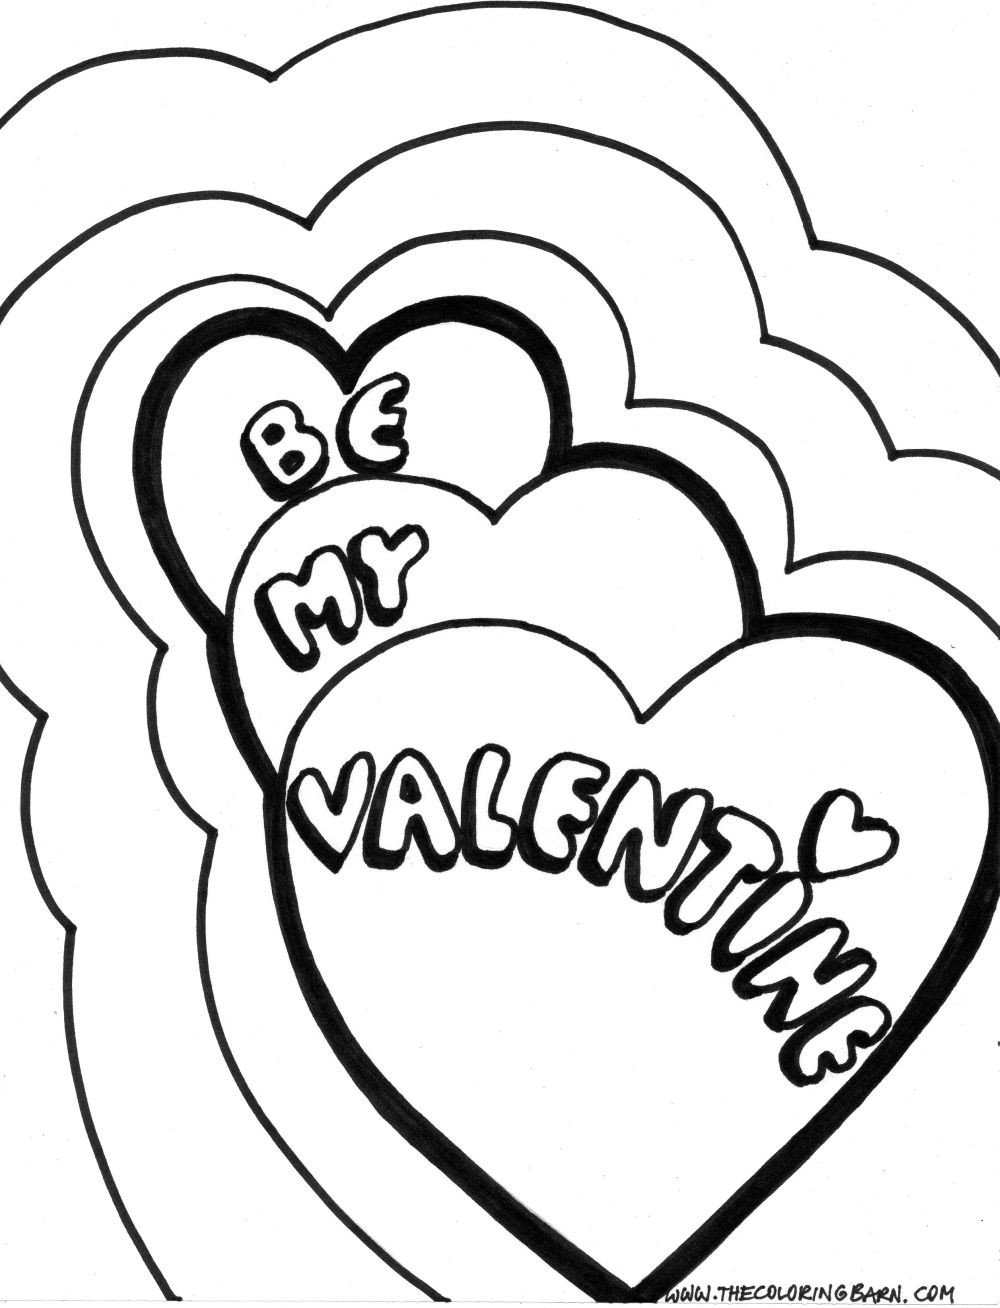 Valentines Day Coloring Pages Free Printable
 Free Printable Valentine Day Coloring Pages